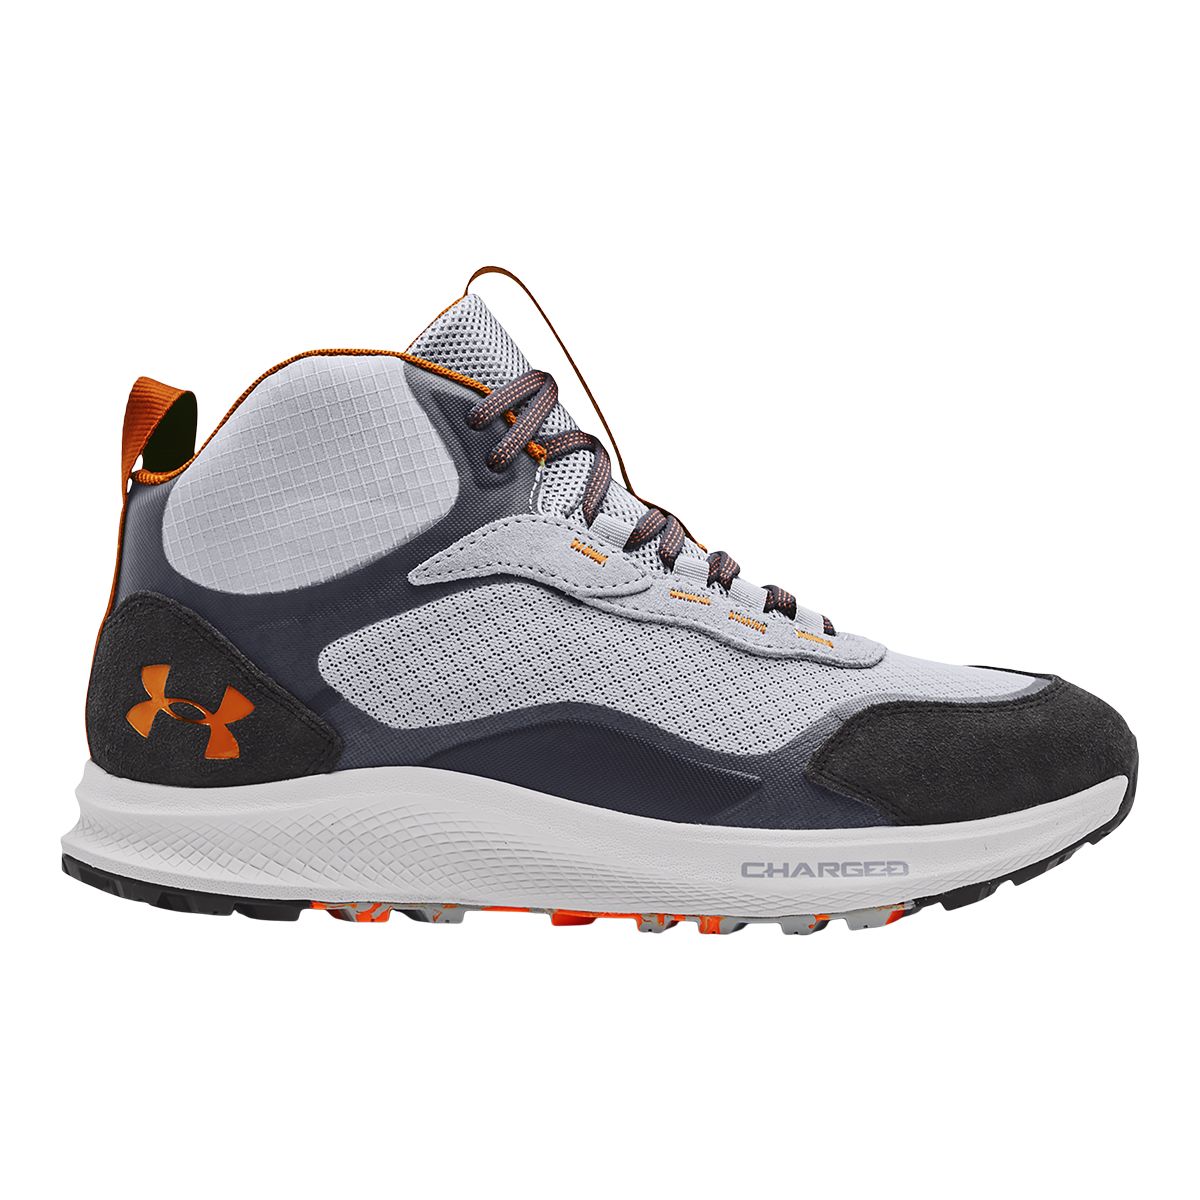 Image of Under Armour Men's Charged Bandit Trek 2 Hiking Shoes